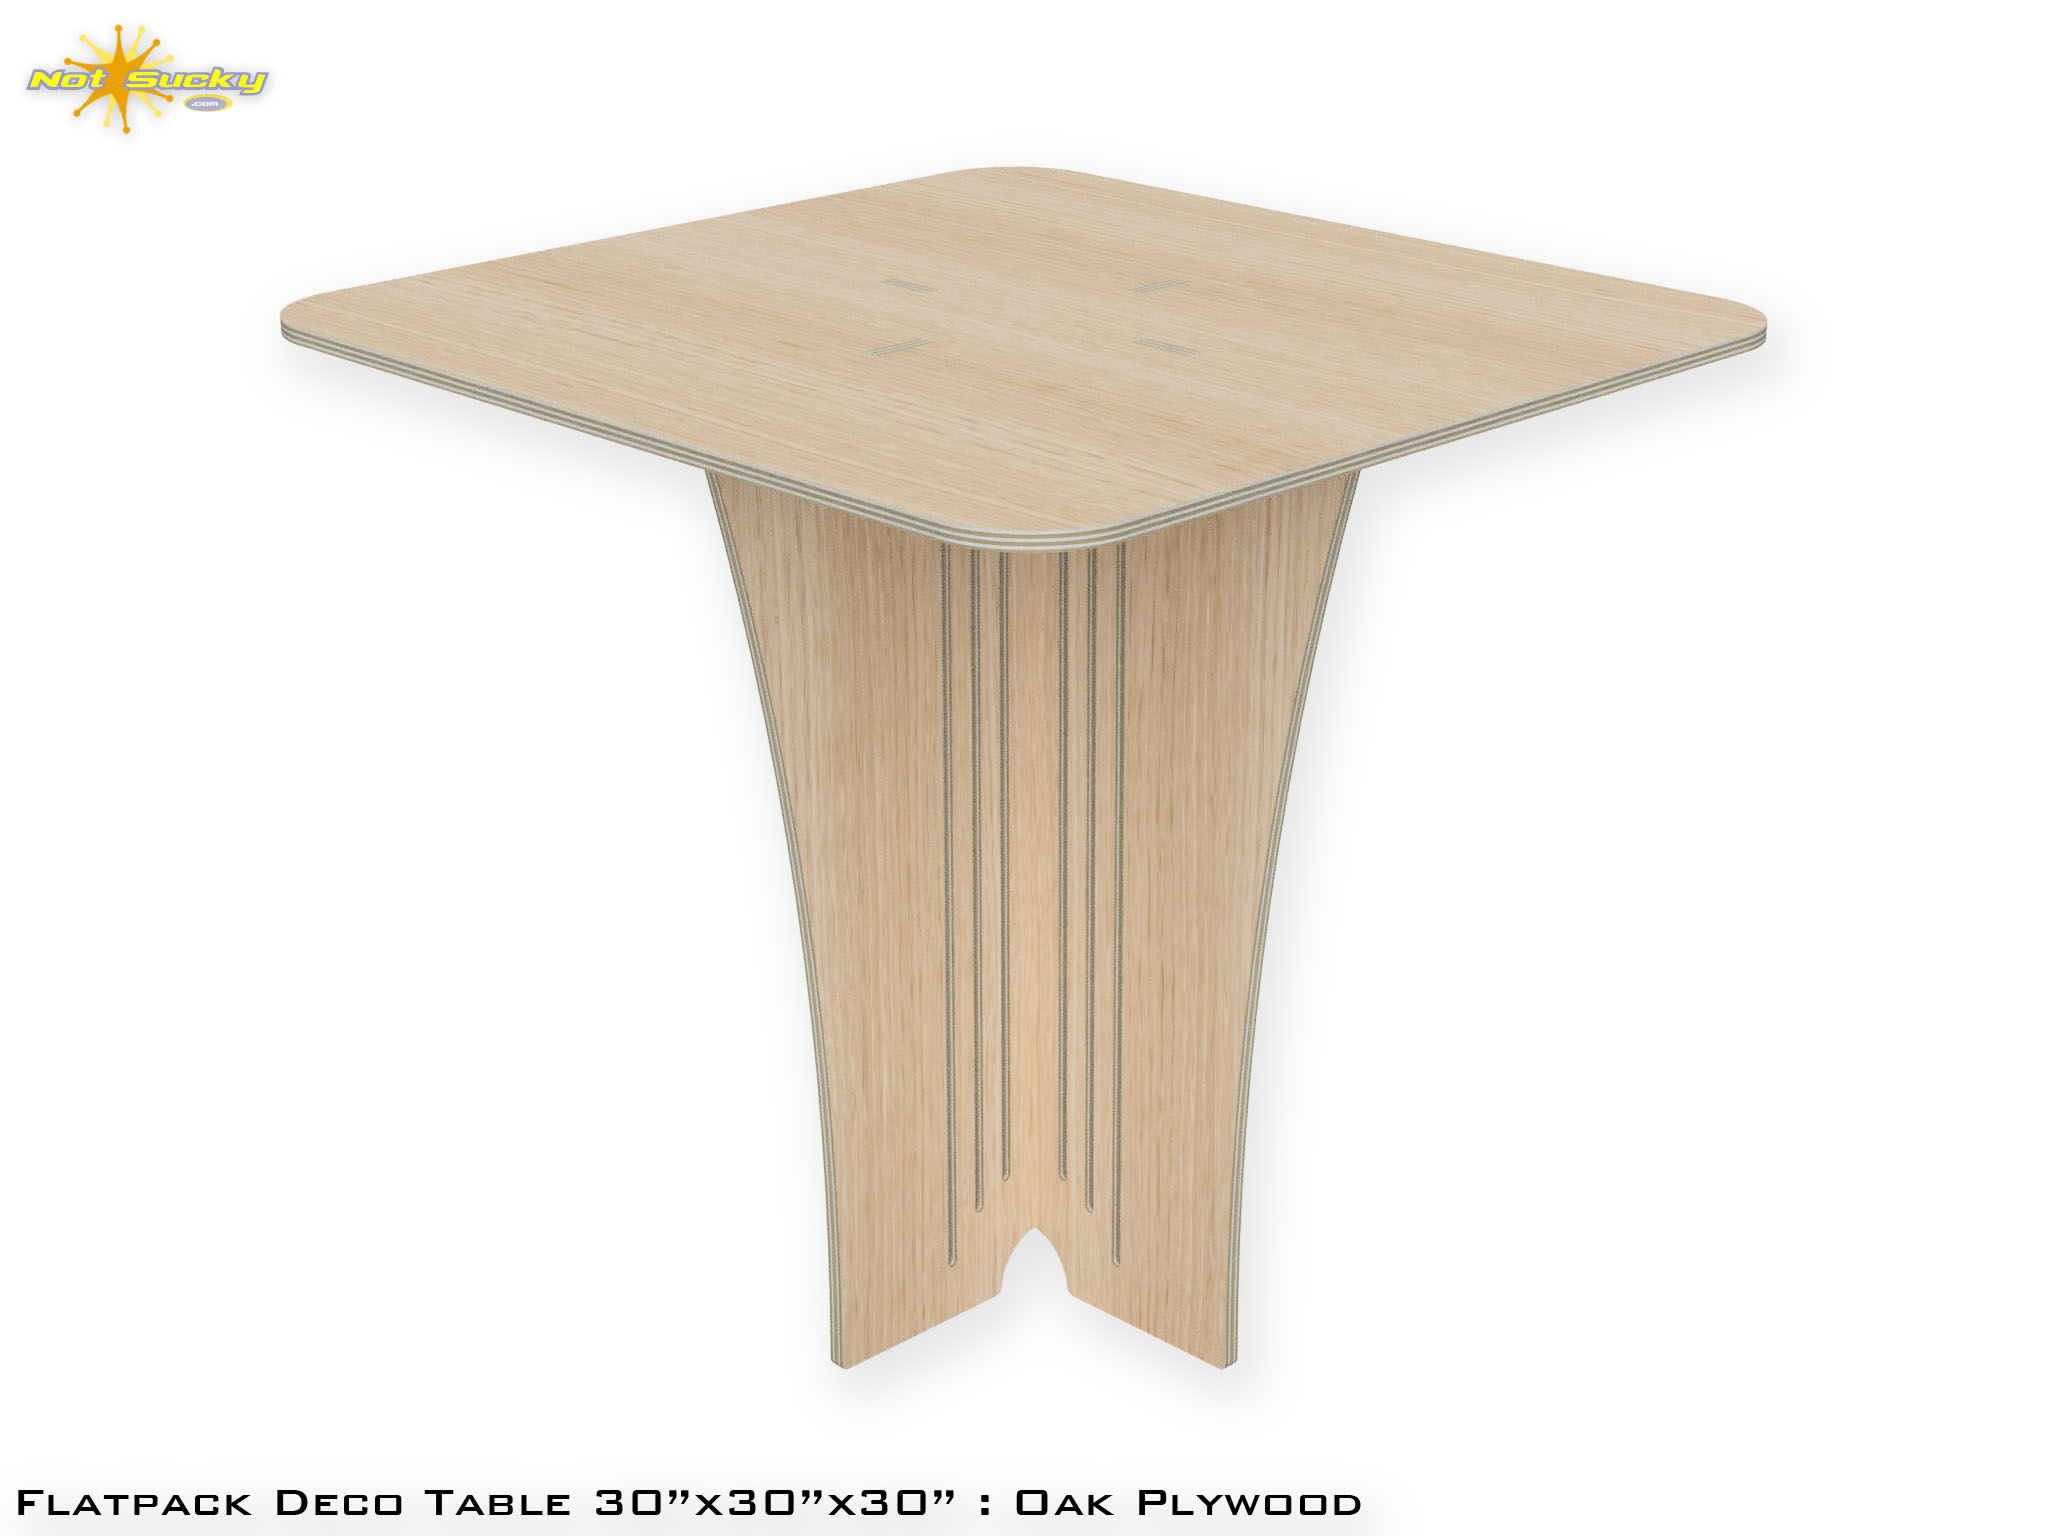 Square Oak Plywood Flat Pack Table